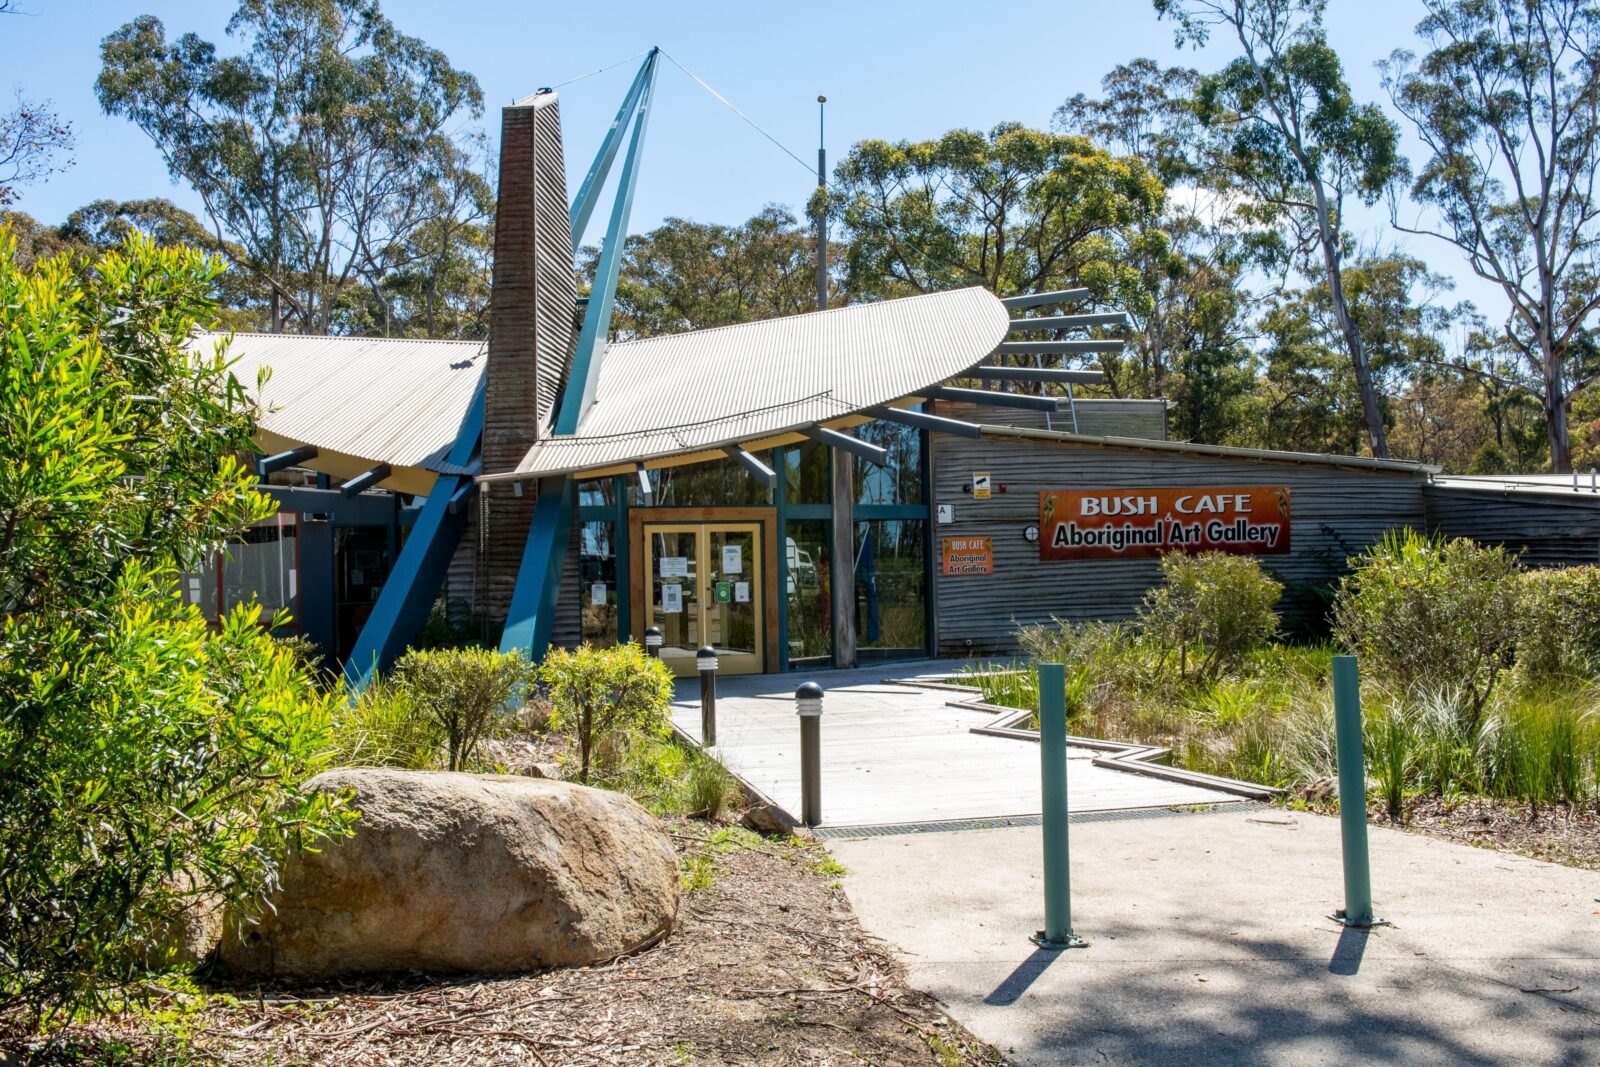 Exterior shot of the Aboriginal Art Gallery set in a bush setting in Kalimna West, East Gippsland